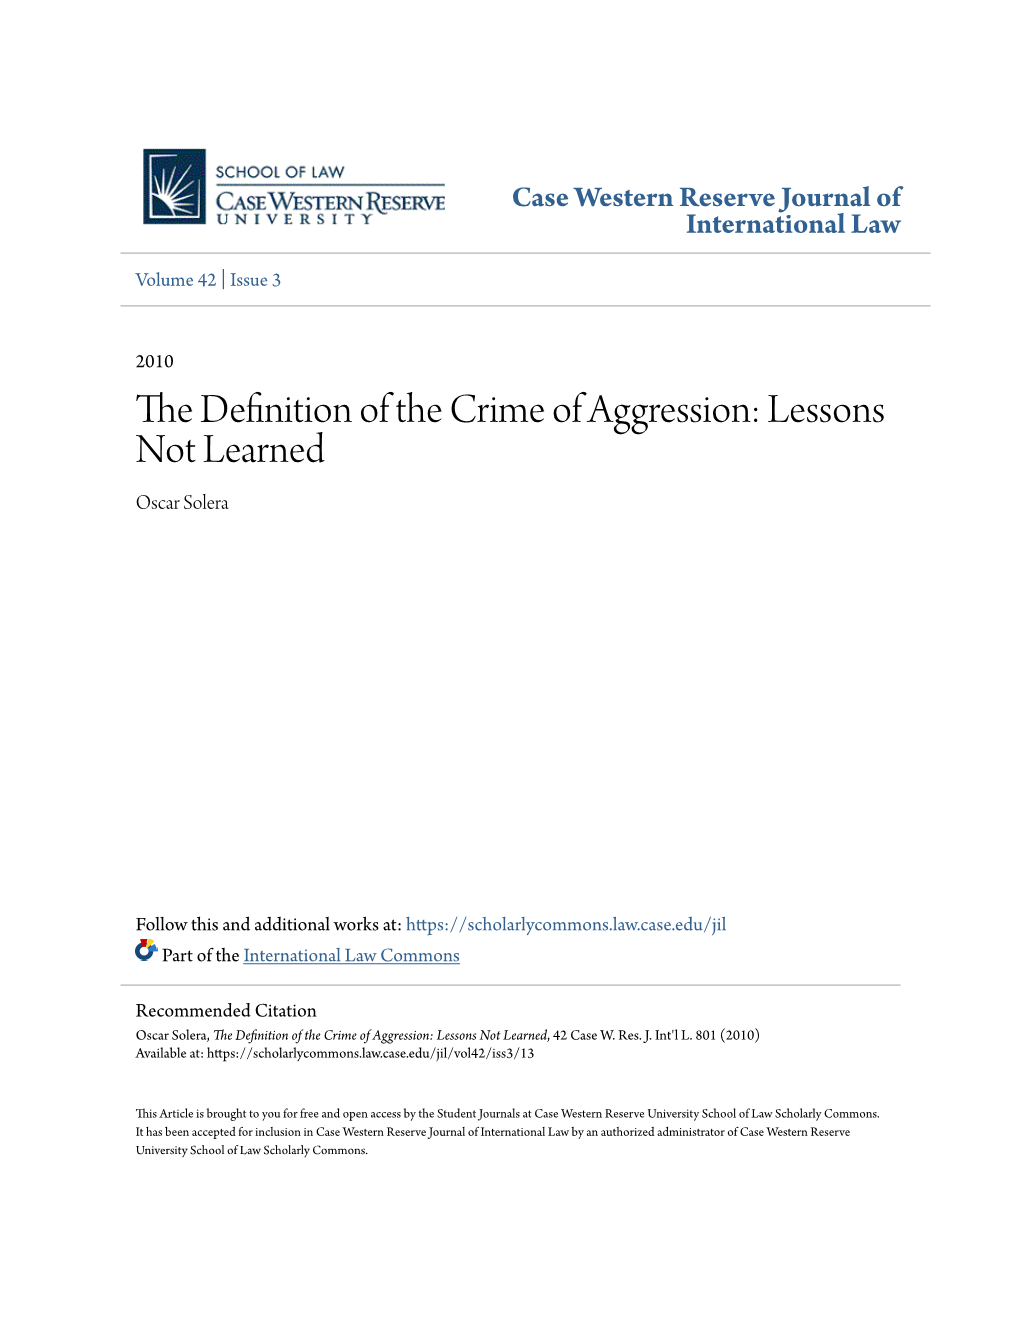 The Definition of the Crime of Aggression: Lessons Not Learned, 42 Case W